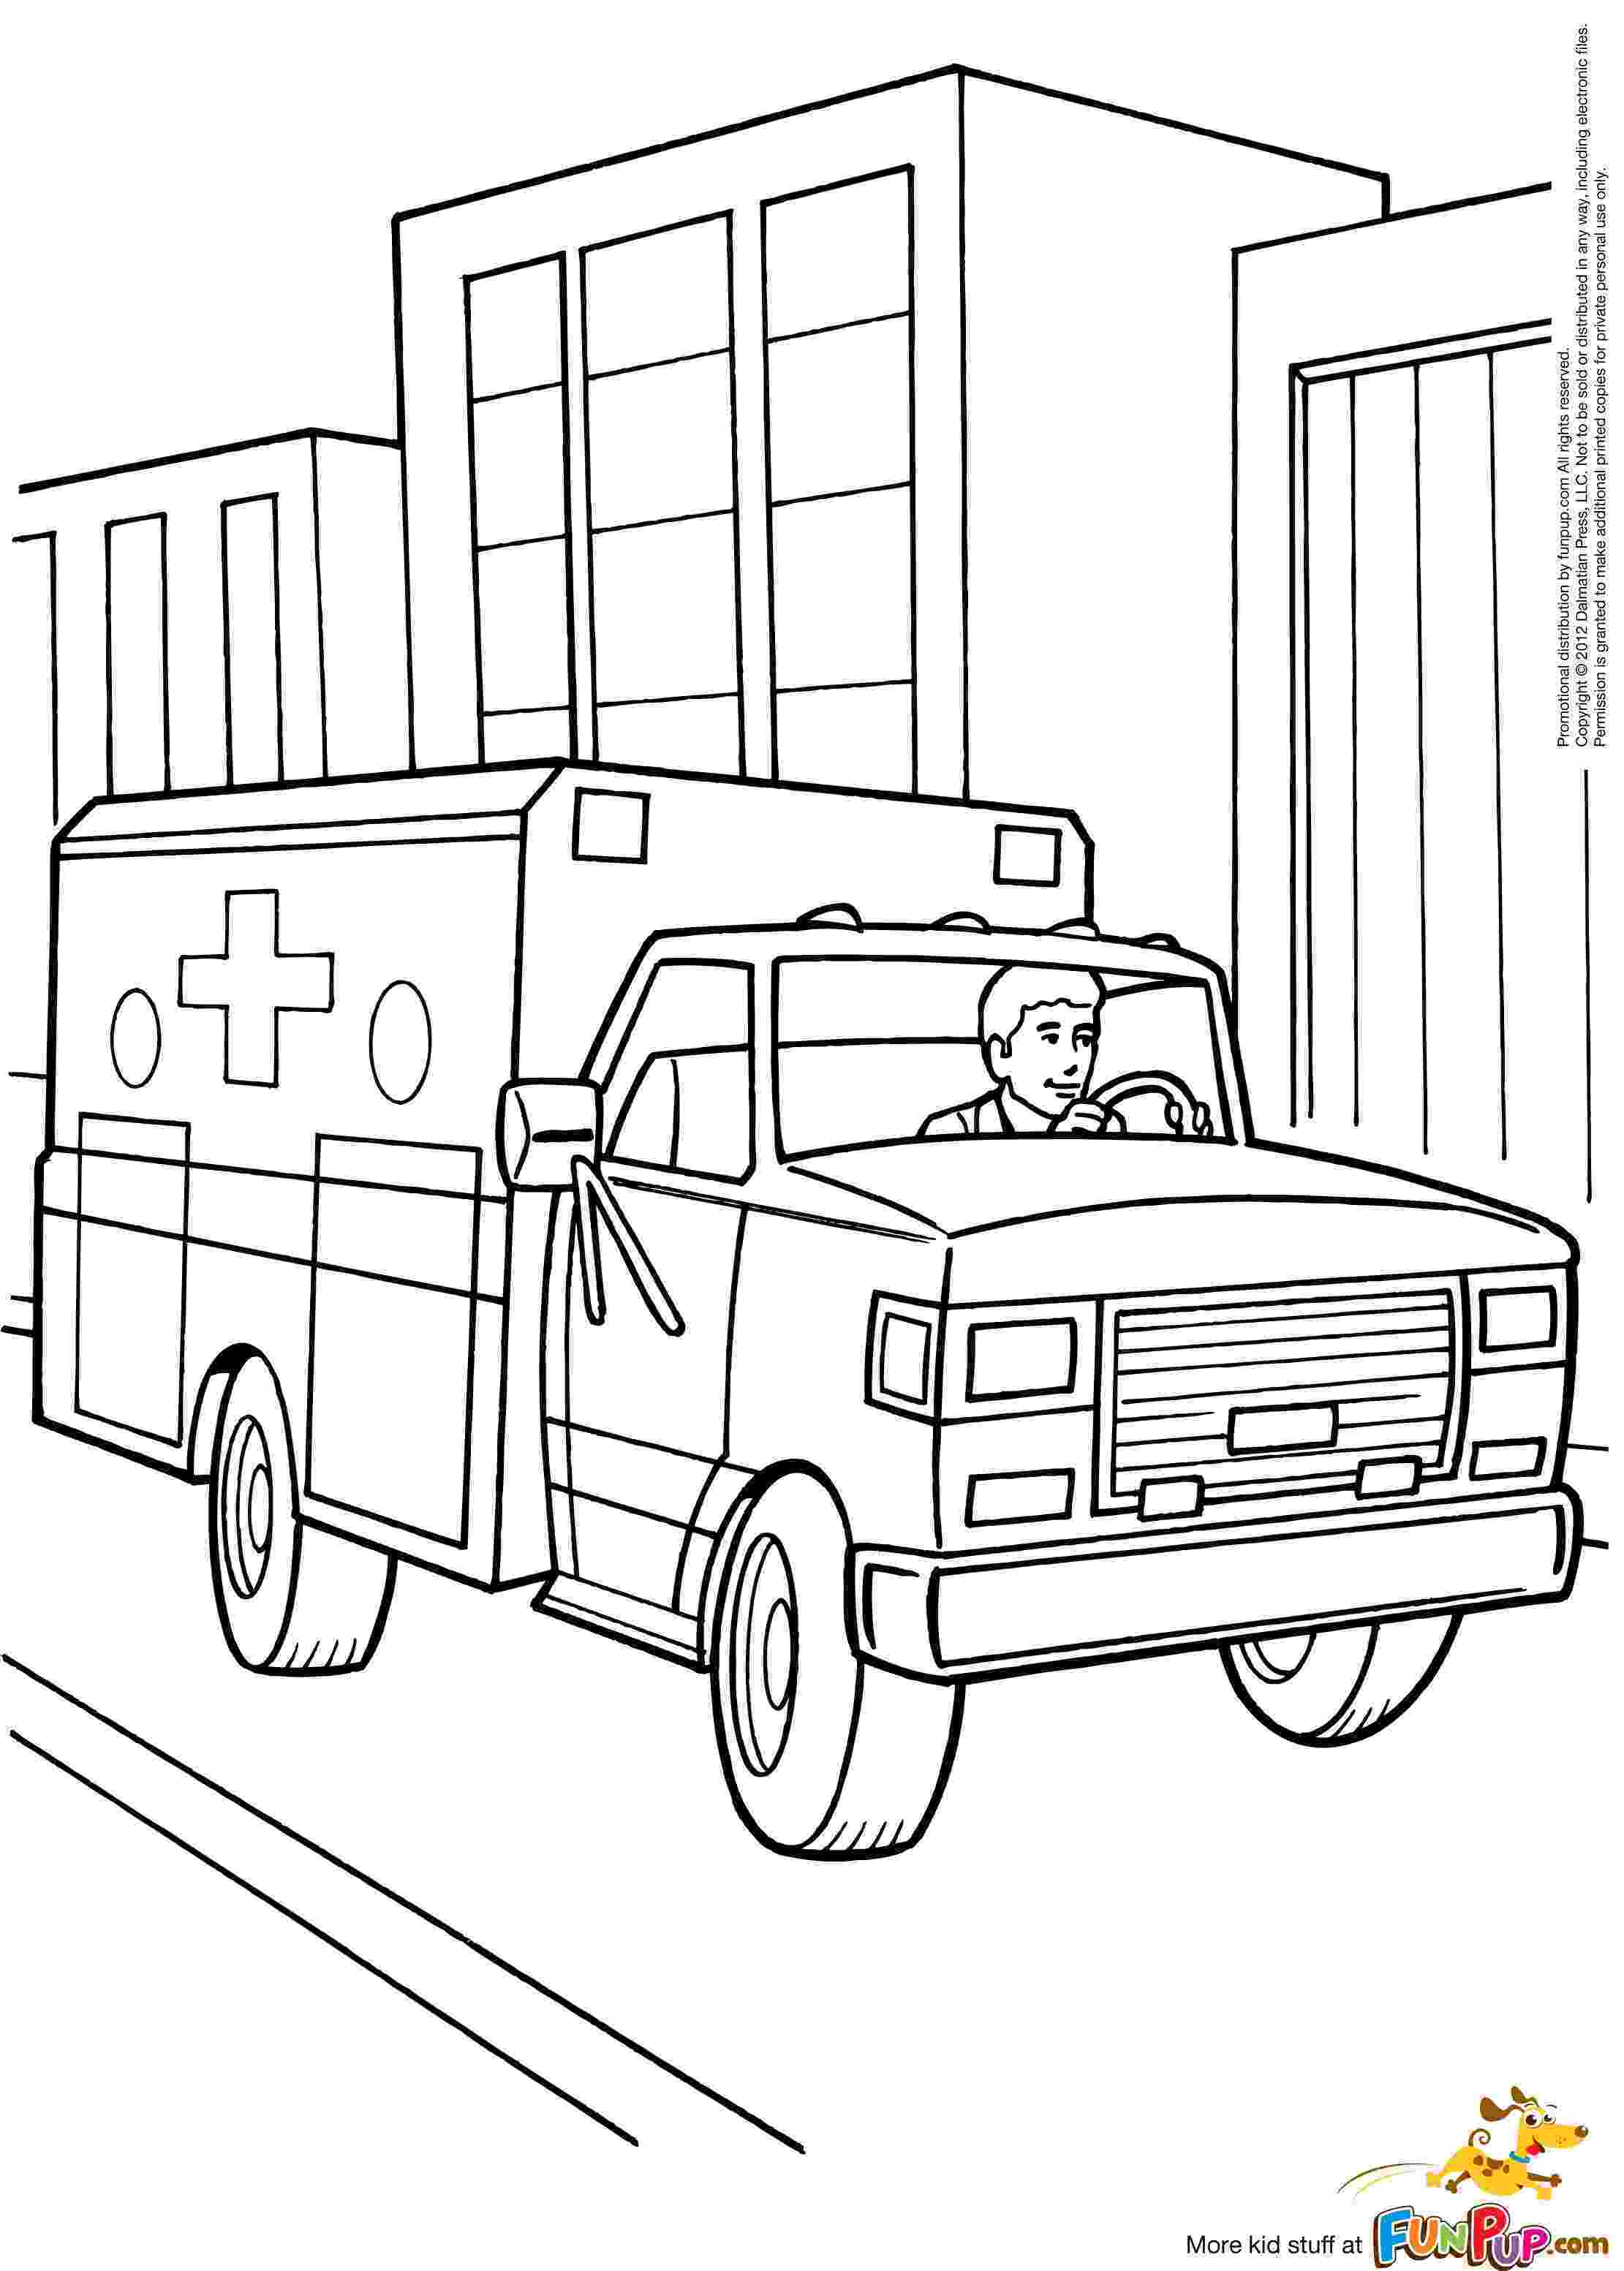 ambulance colouring pages ambulance coloring pages to download and print for free pages colouring ambulance 